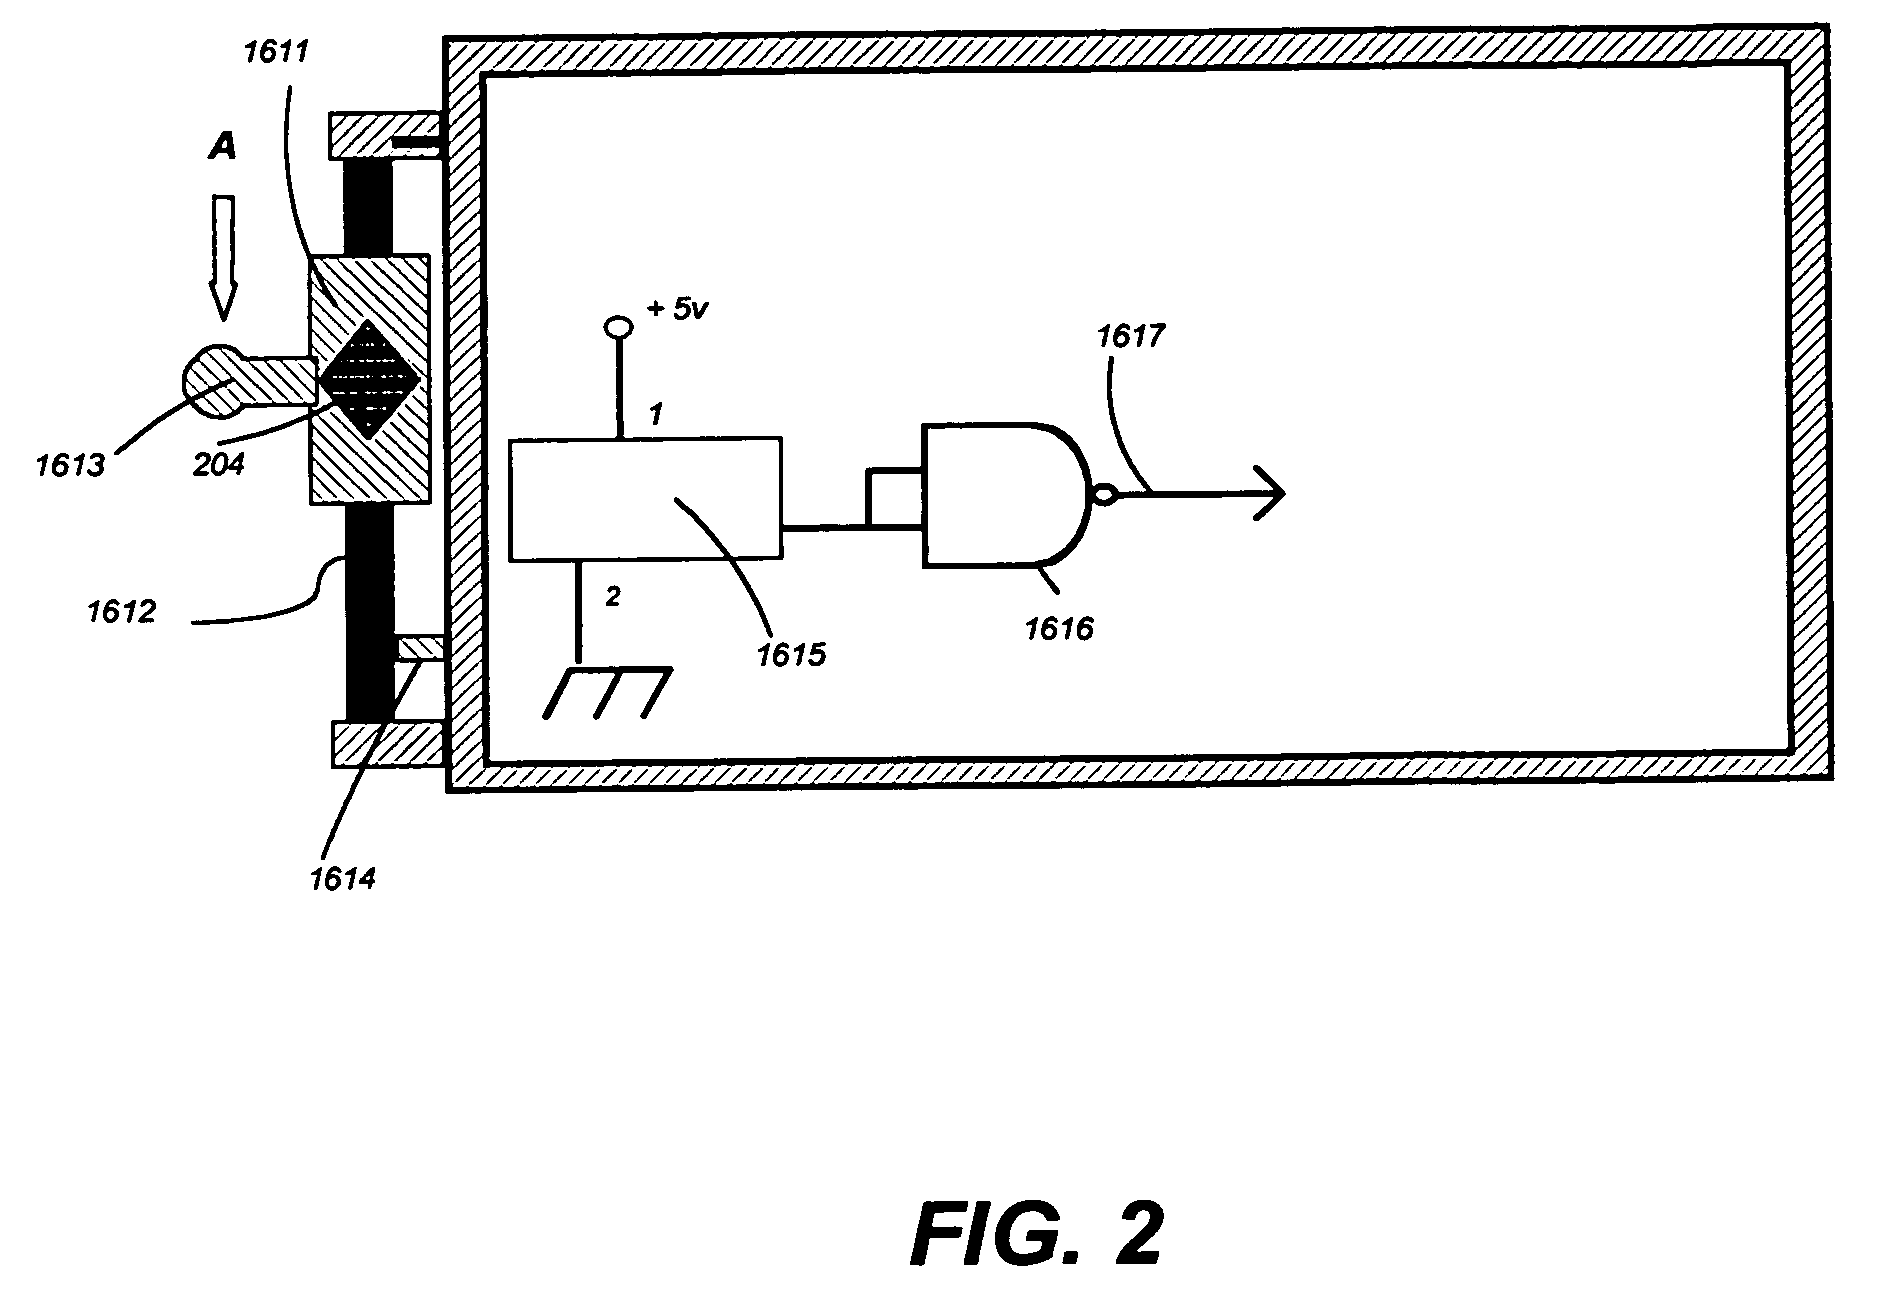 Sealed, waterproof digital electronic camera system and method of fabricating and communicating with same